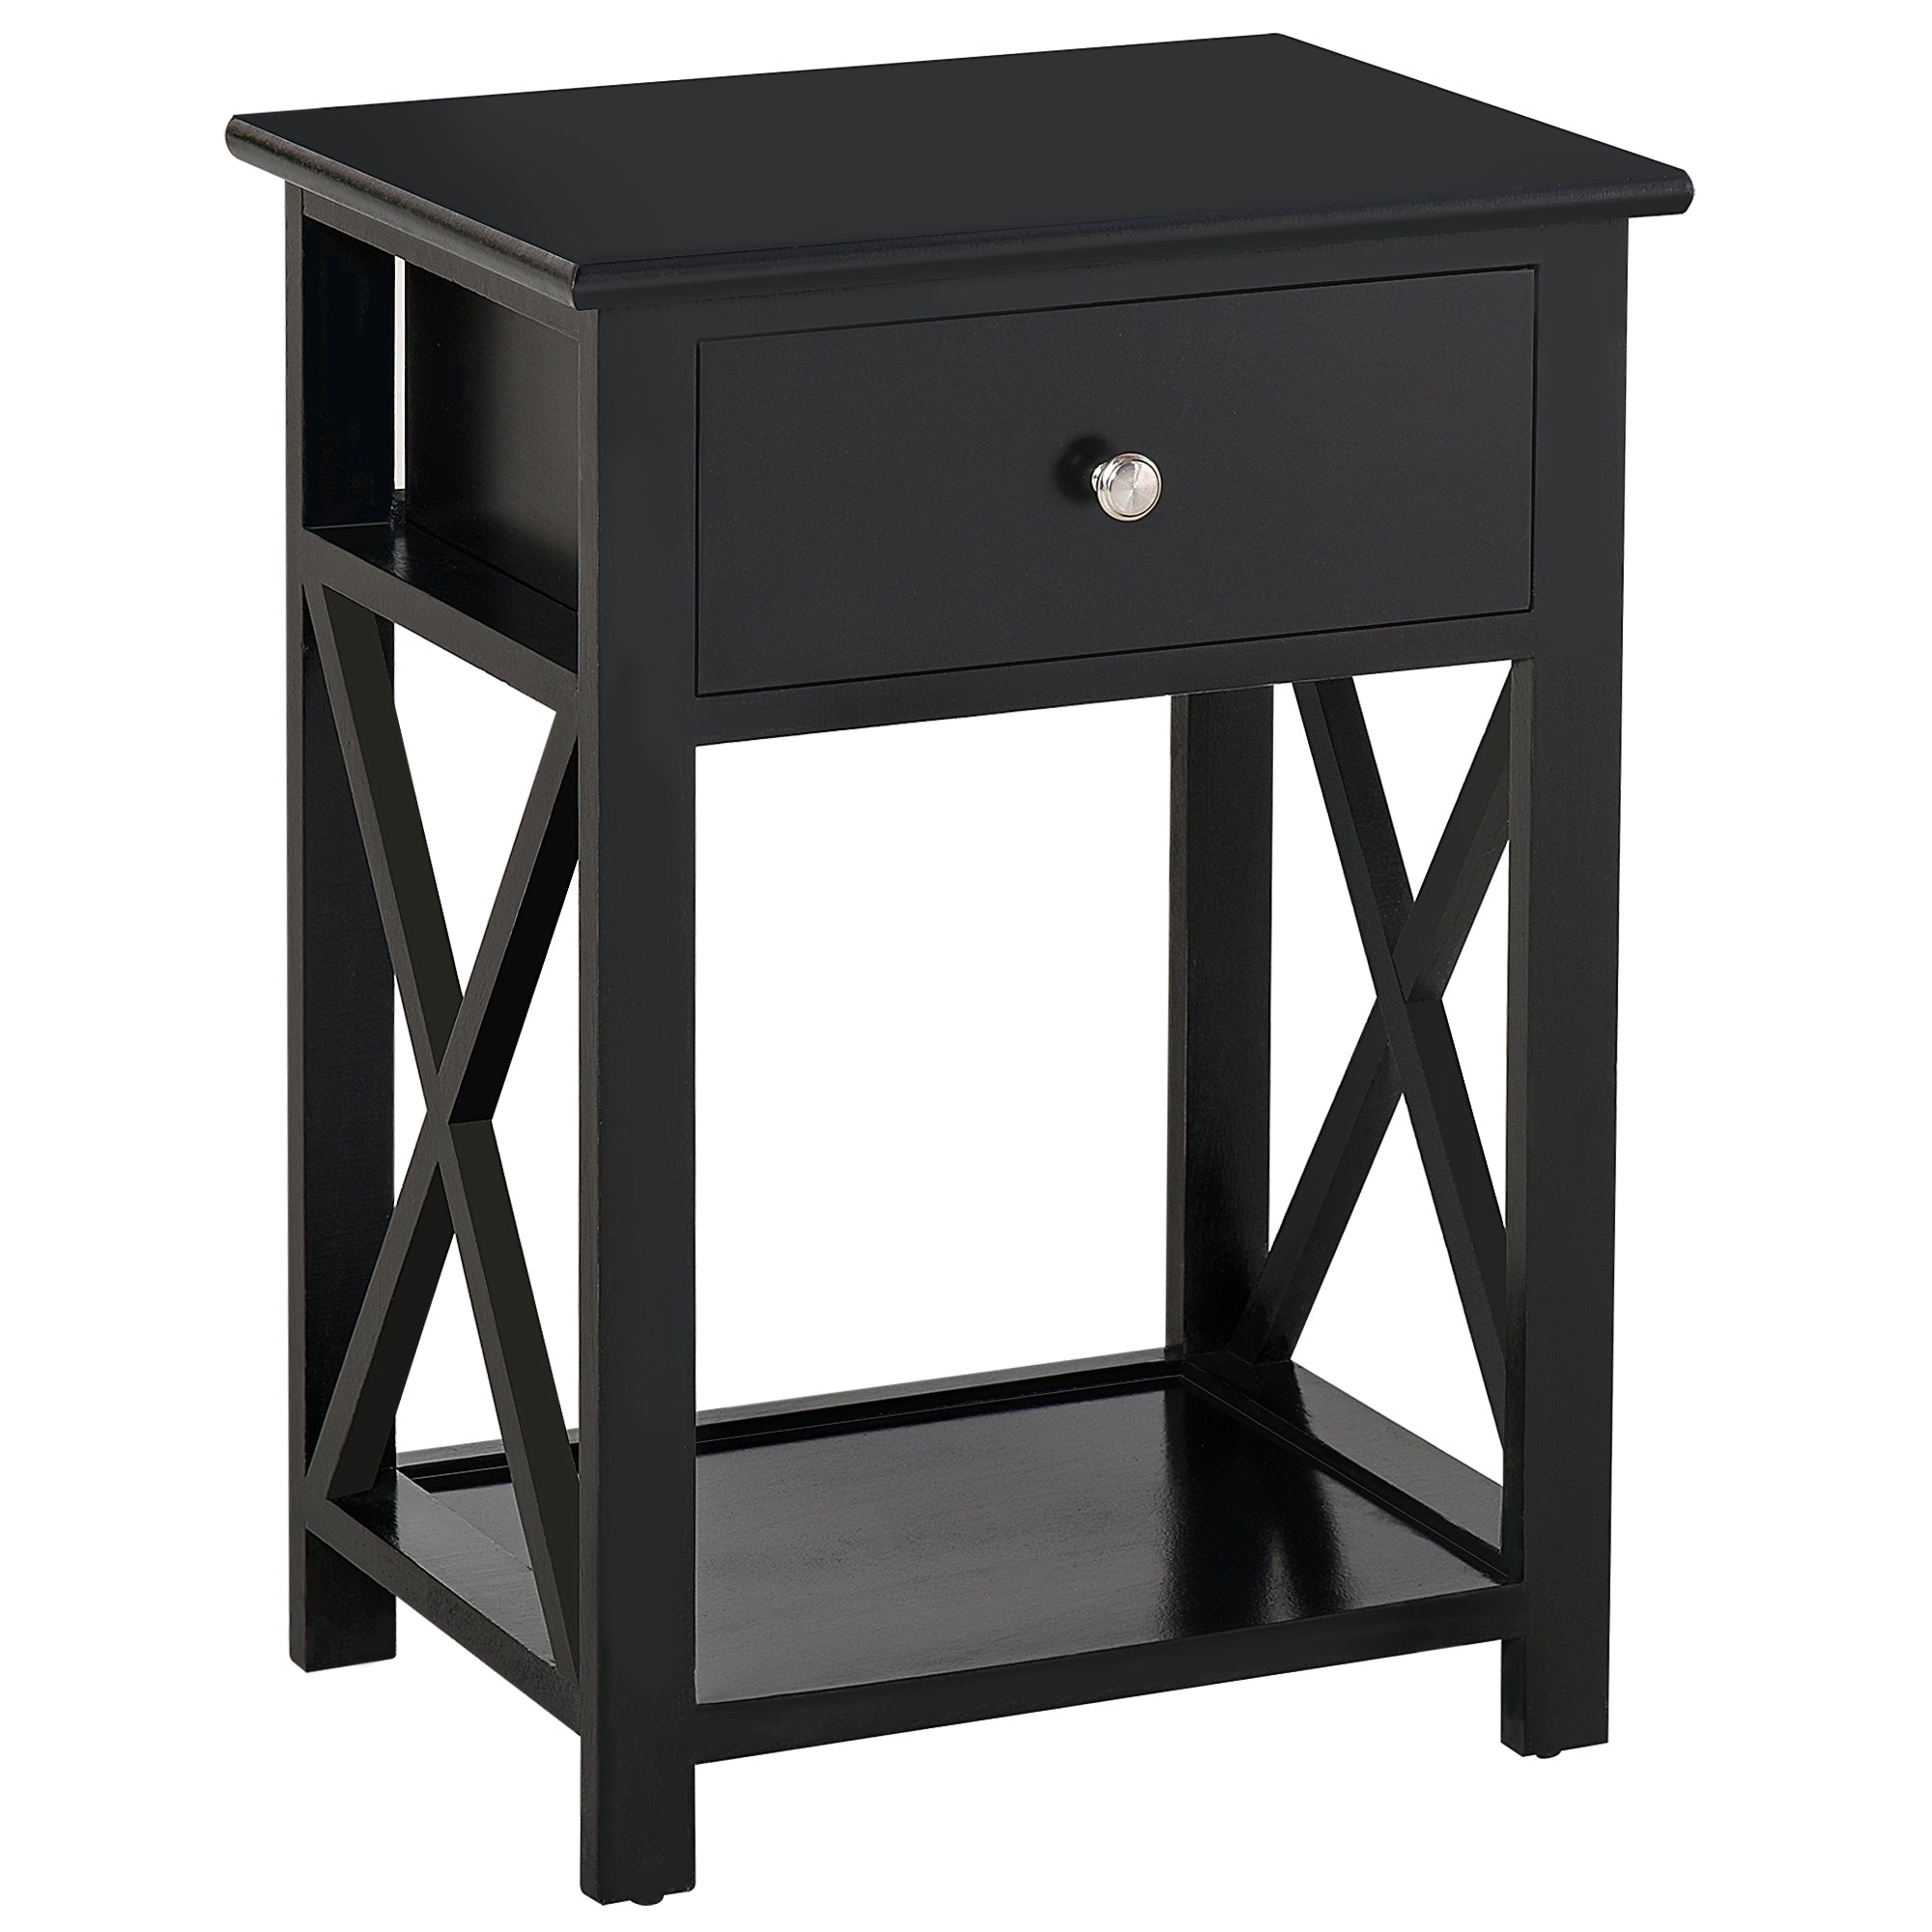 Traditional Accent End Table With 1 Drawer,X Bar Bottom Storage Shelf, for Living Room Bedroom Room 40L x 30W x 55H cm - Black-0